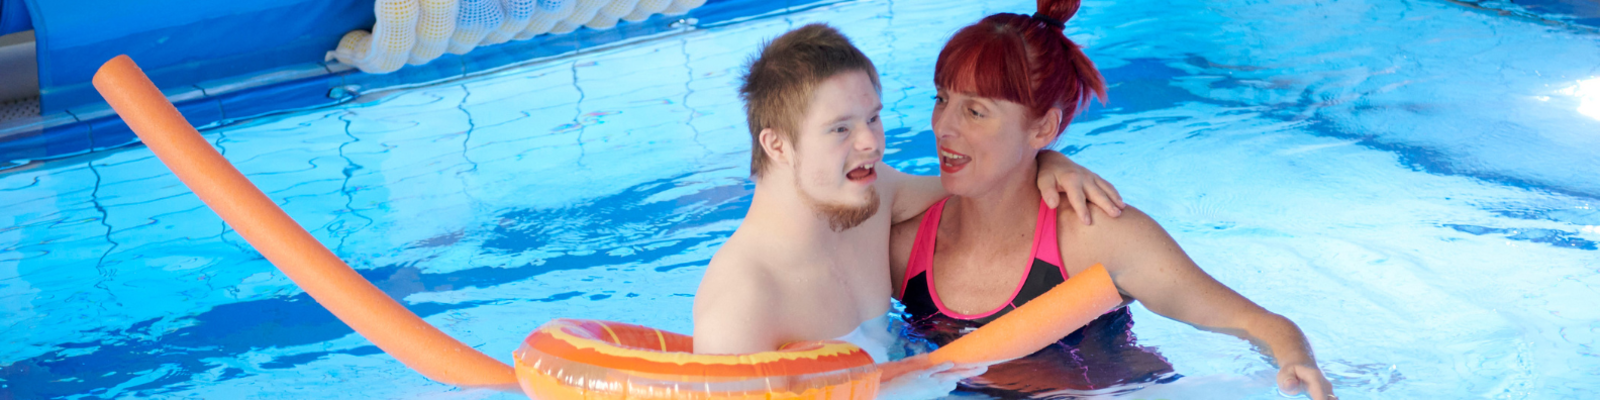 Man with disability floating in a pool assisted by social carer and pool noodles. They are both smiling wide.